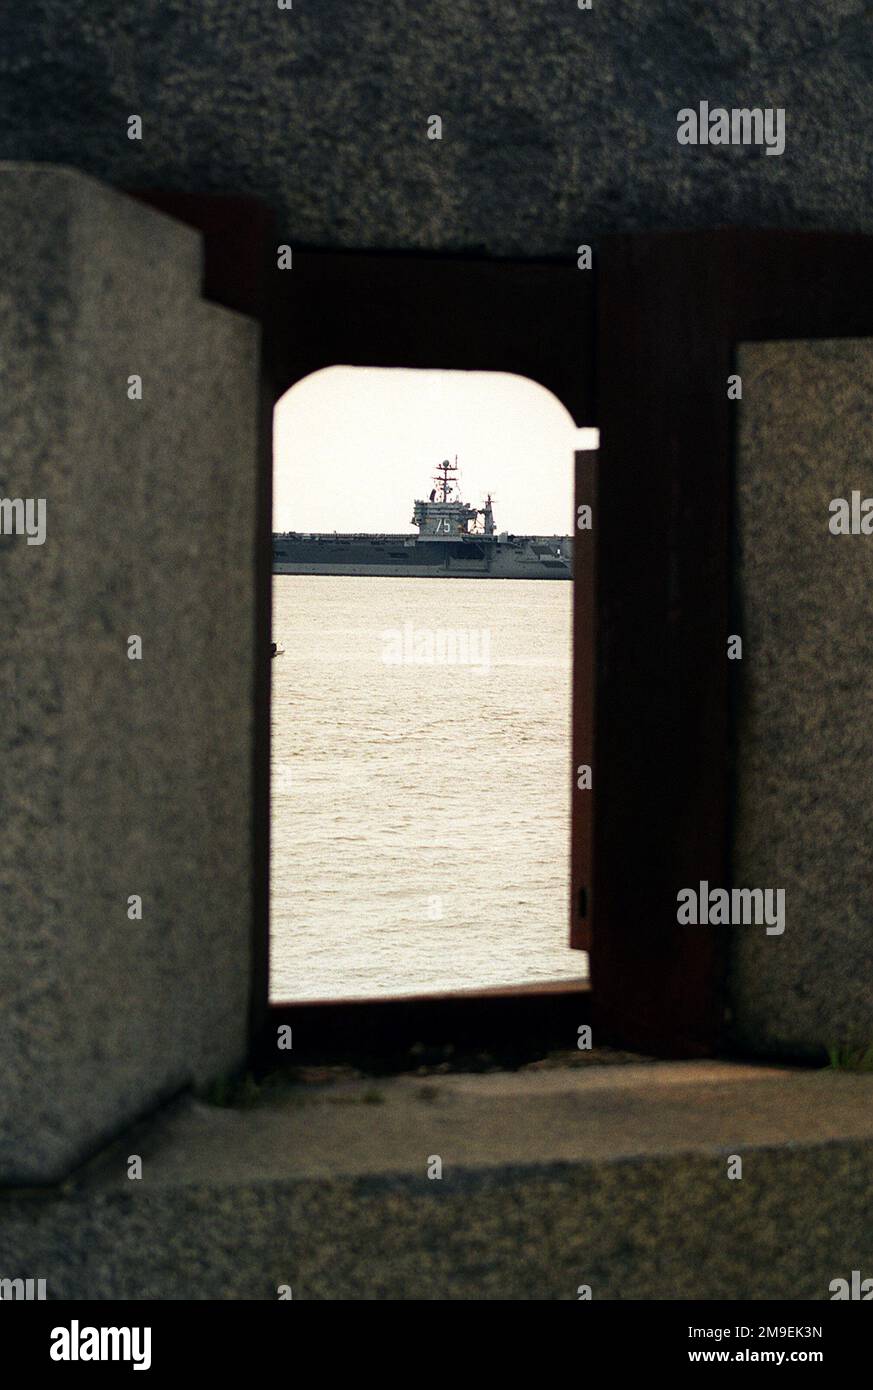 A view of the amidships section of the Nuclear-Powered Aircraft Carrier USS HARRY S. TRUMAN (CVN 75) through one of the gun ports of the old coastal defense battery at Fort Wool on the entrance into the inner harbor. Base: Hampton Roads, Norfolk State: Virginia (VA) Country: United States Of America (USA) Stock Photo